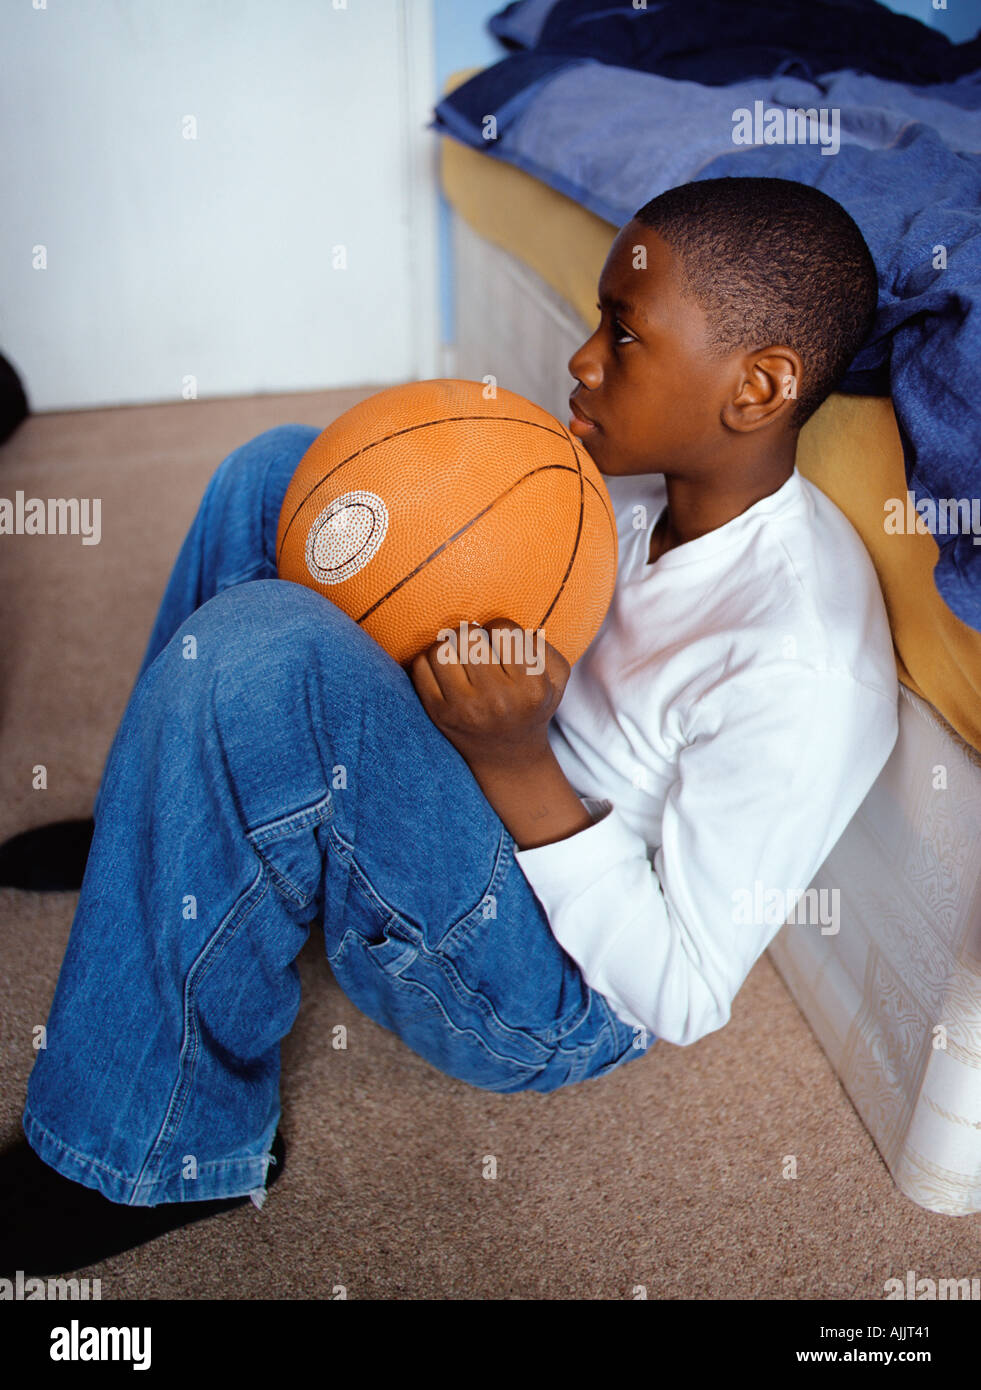 Basketball Black Boy High Resolution Stock Photography and Images - Alamy